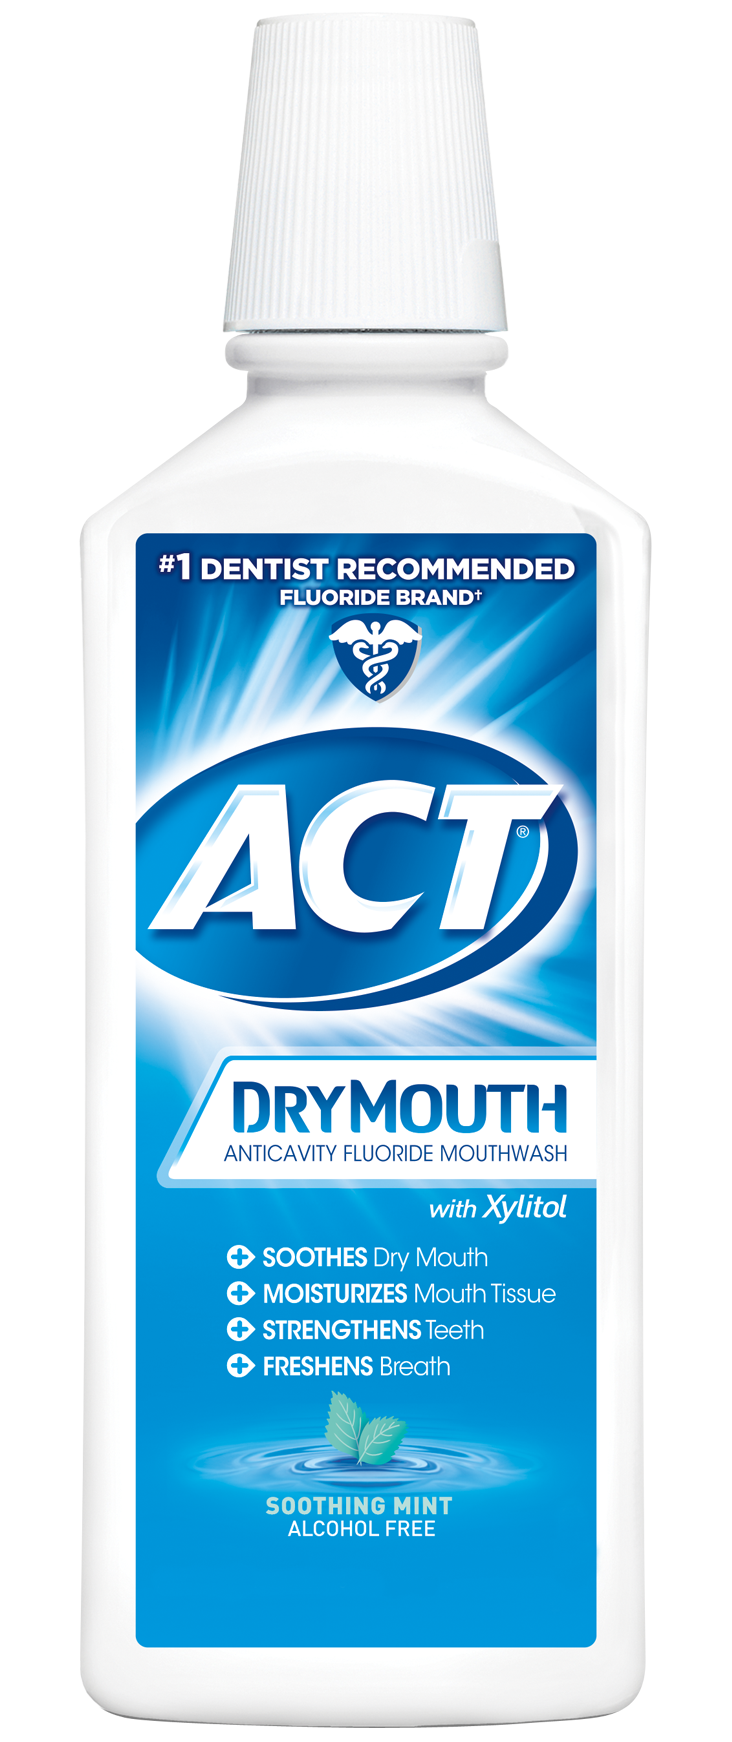 ACT® Soothing Mint Dry Mouth Anticavity Fluoride Mouthwash